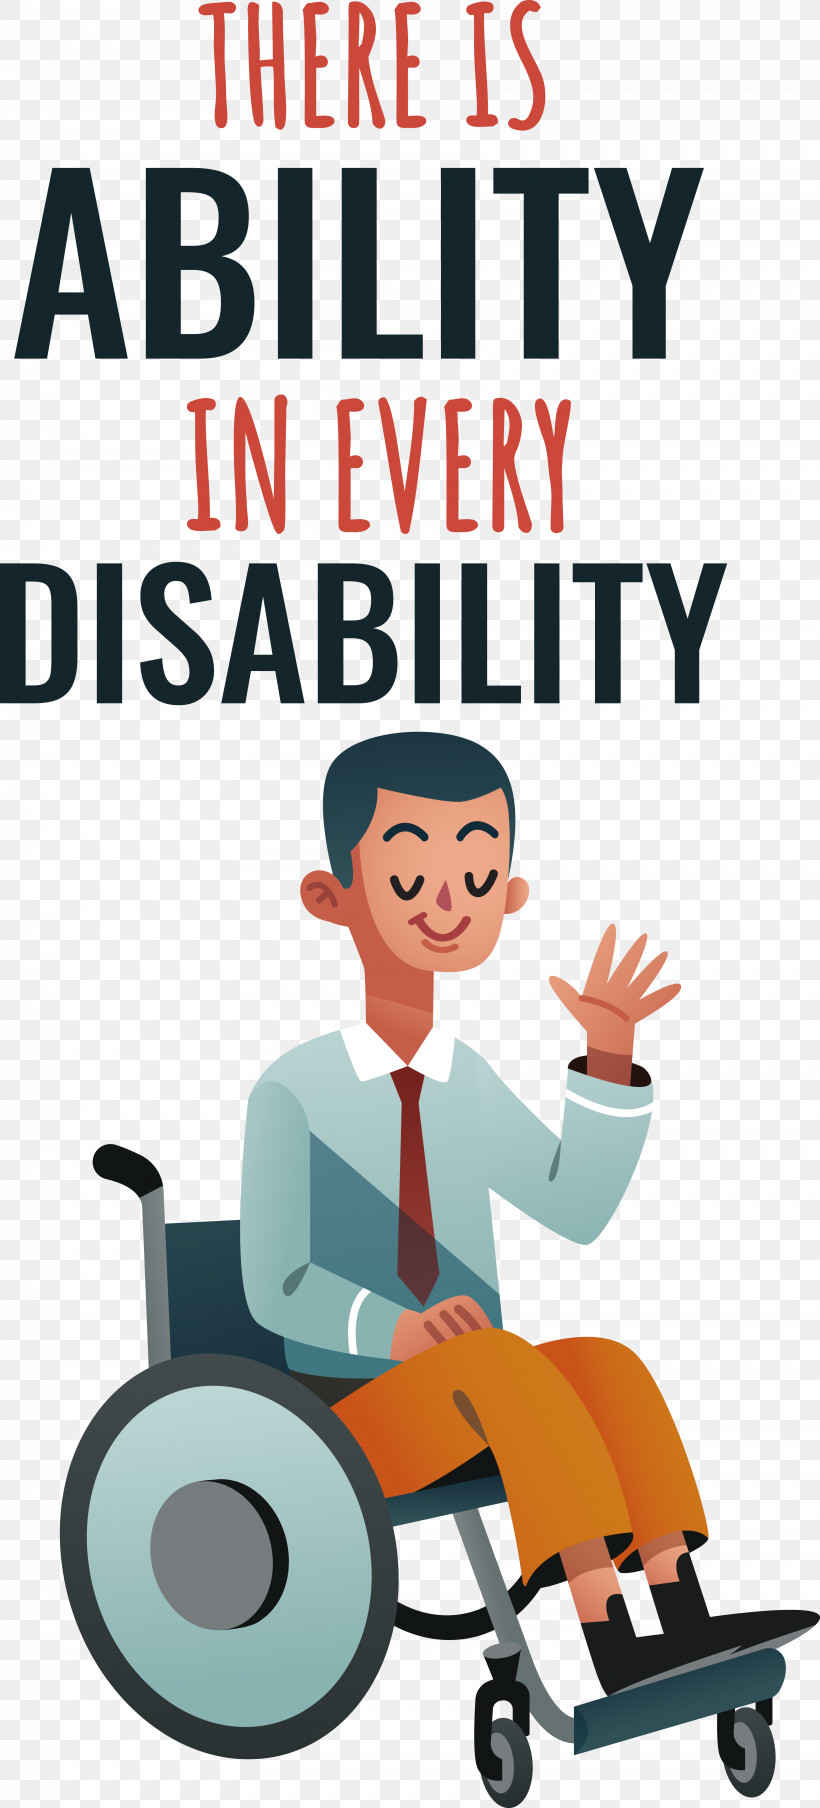 International Disability Day Never Give Up International Day Disabled Persons, PNG, 3444x7596px, International Disability Day, Disabled Persons, International Day, Never Give Up Download Free